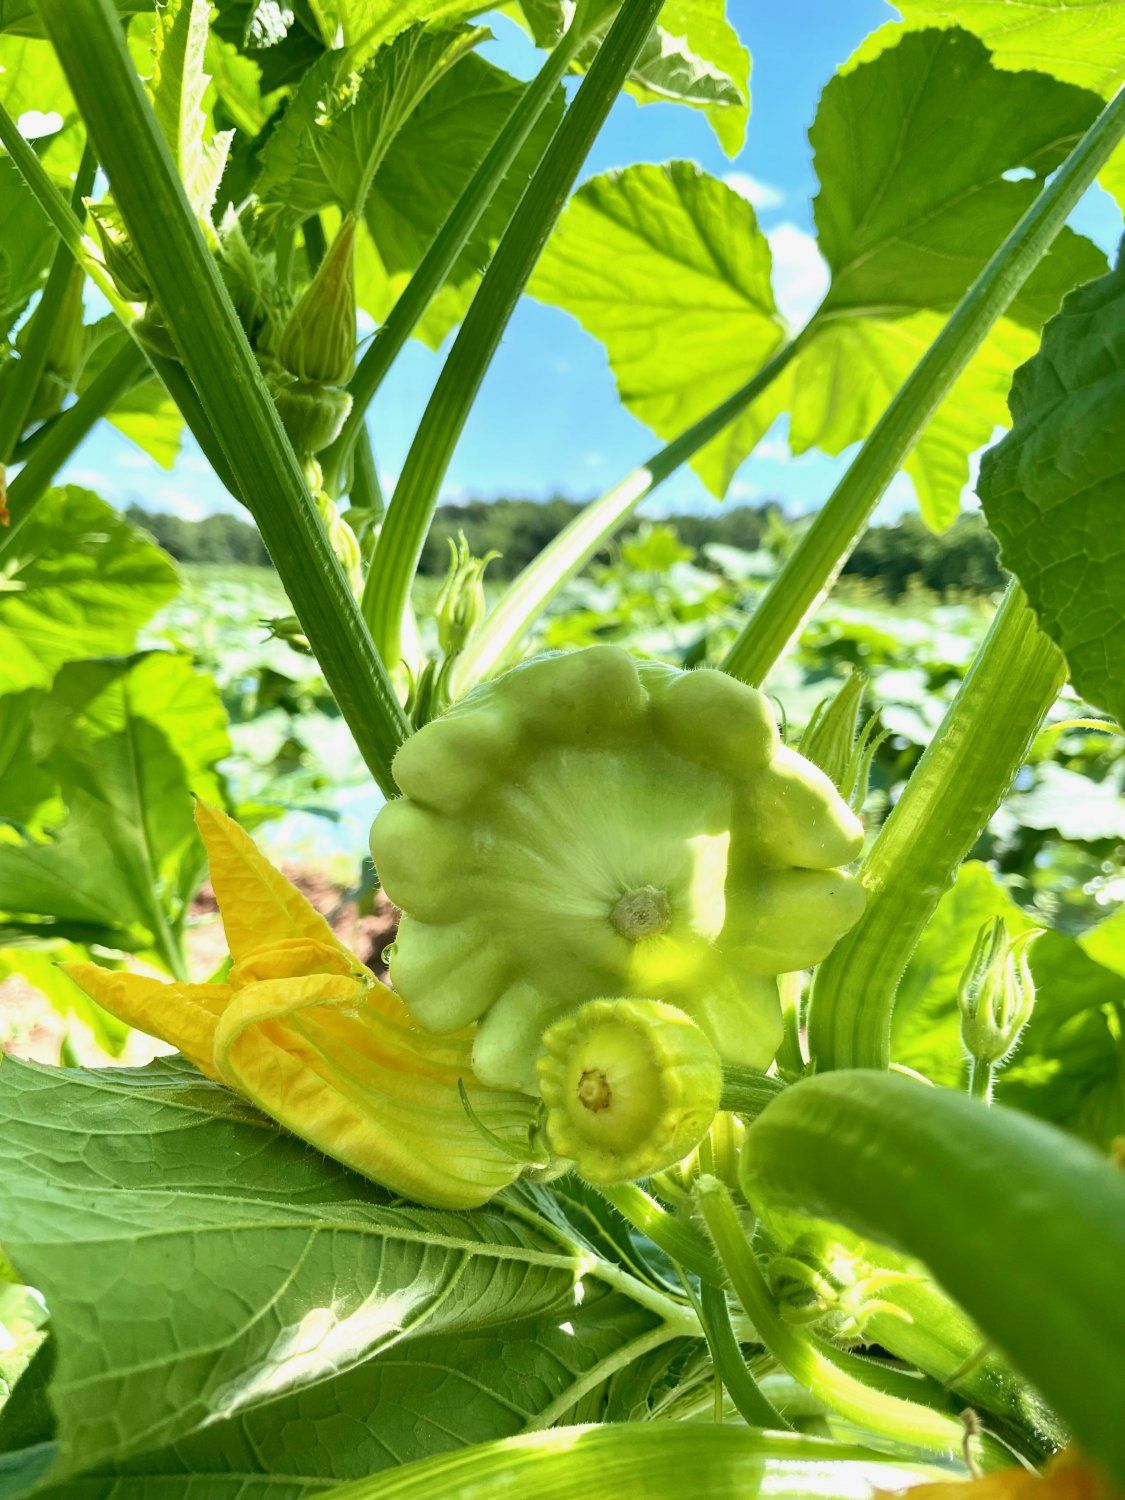 Previous Happening: A Summer of Squash